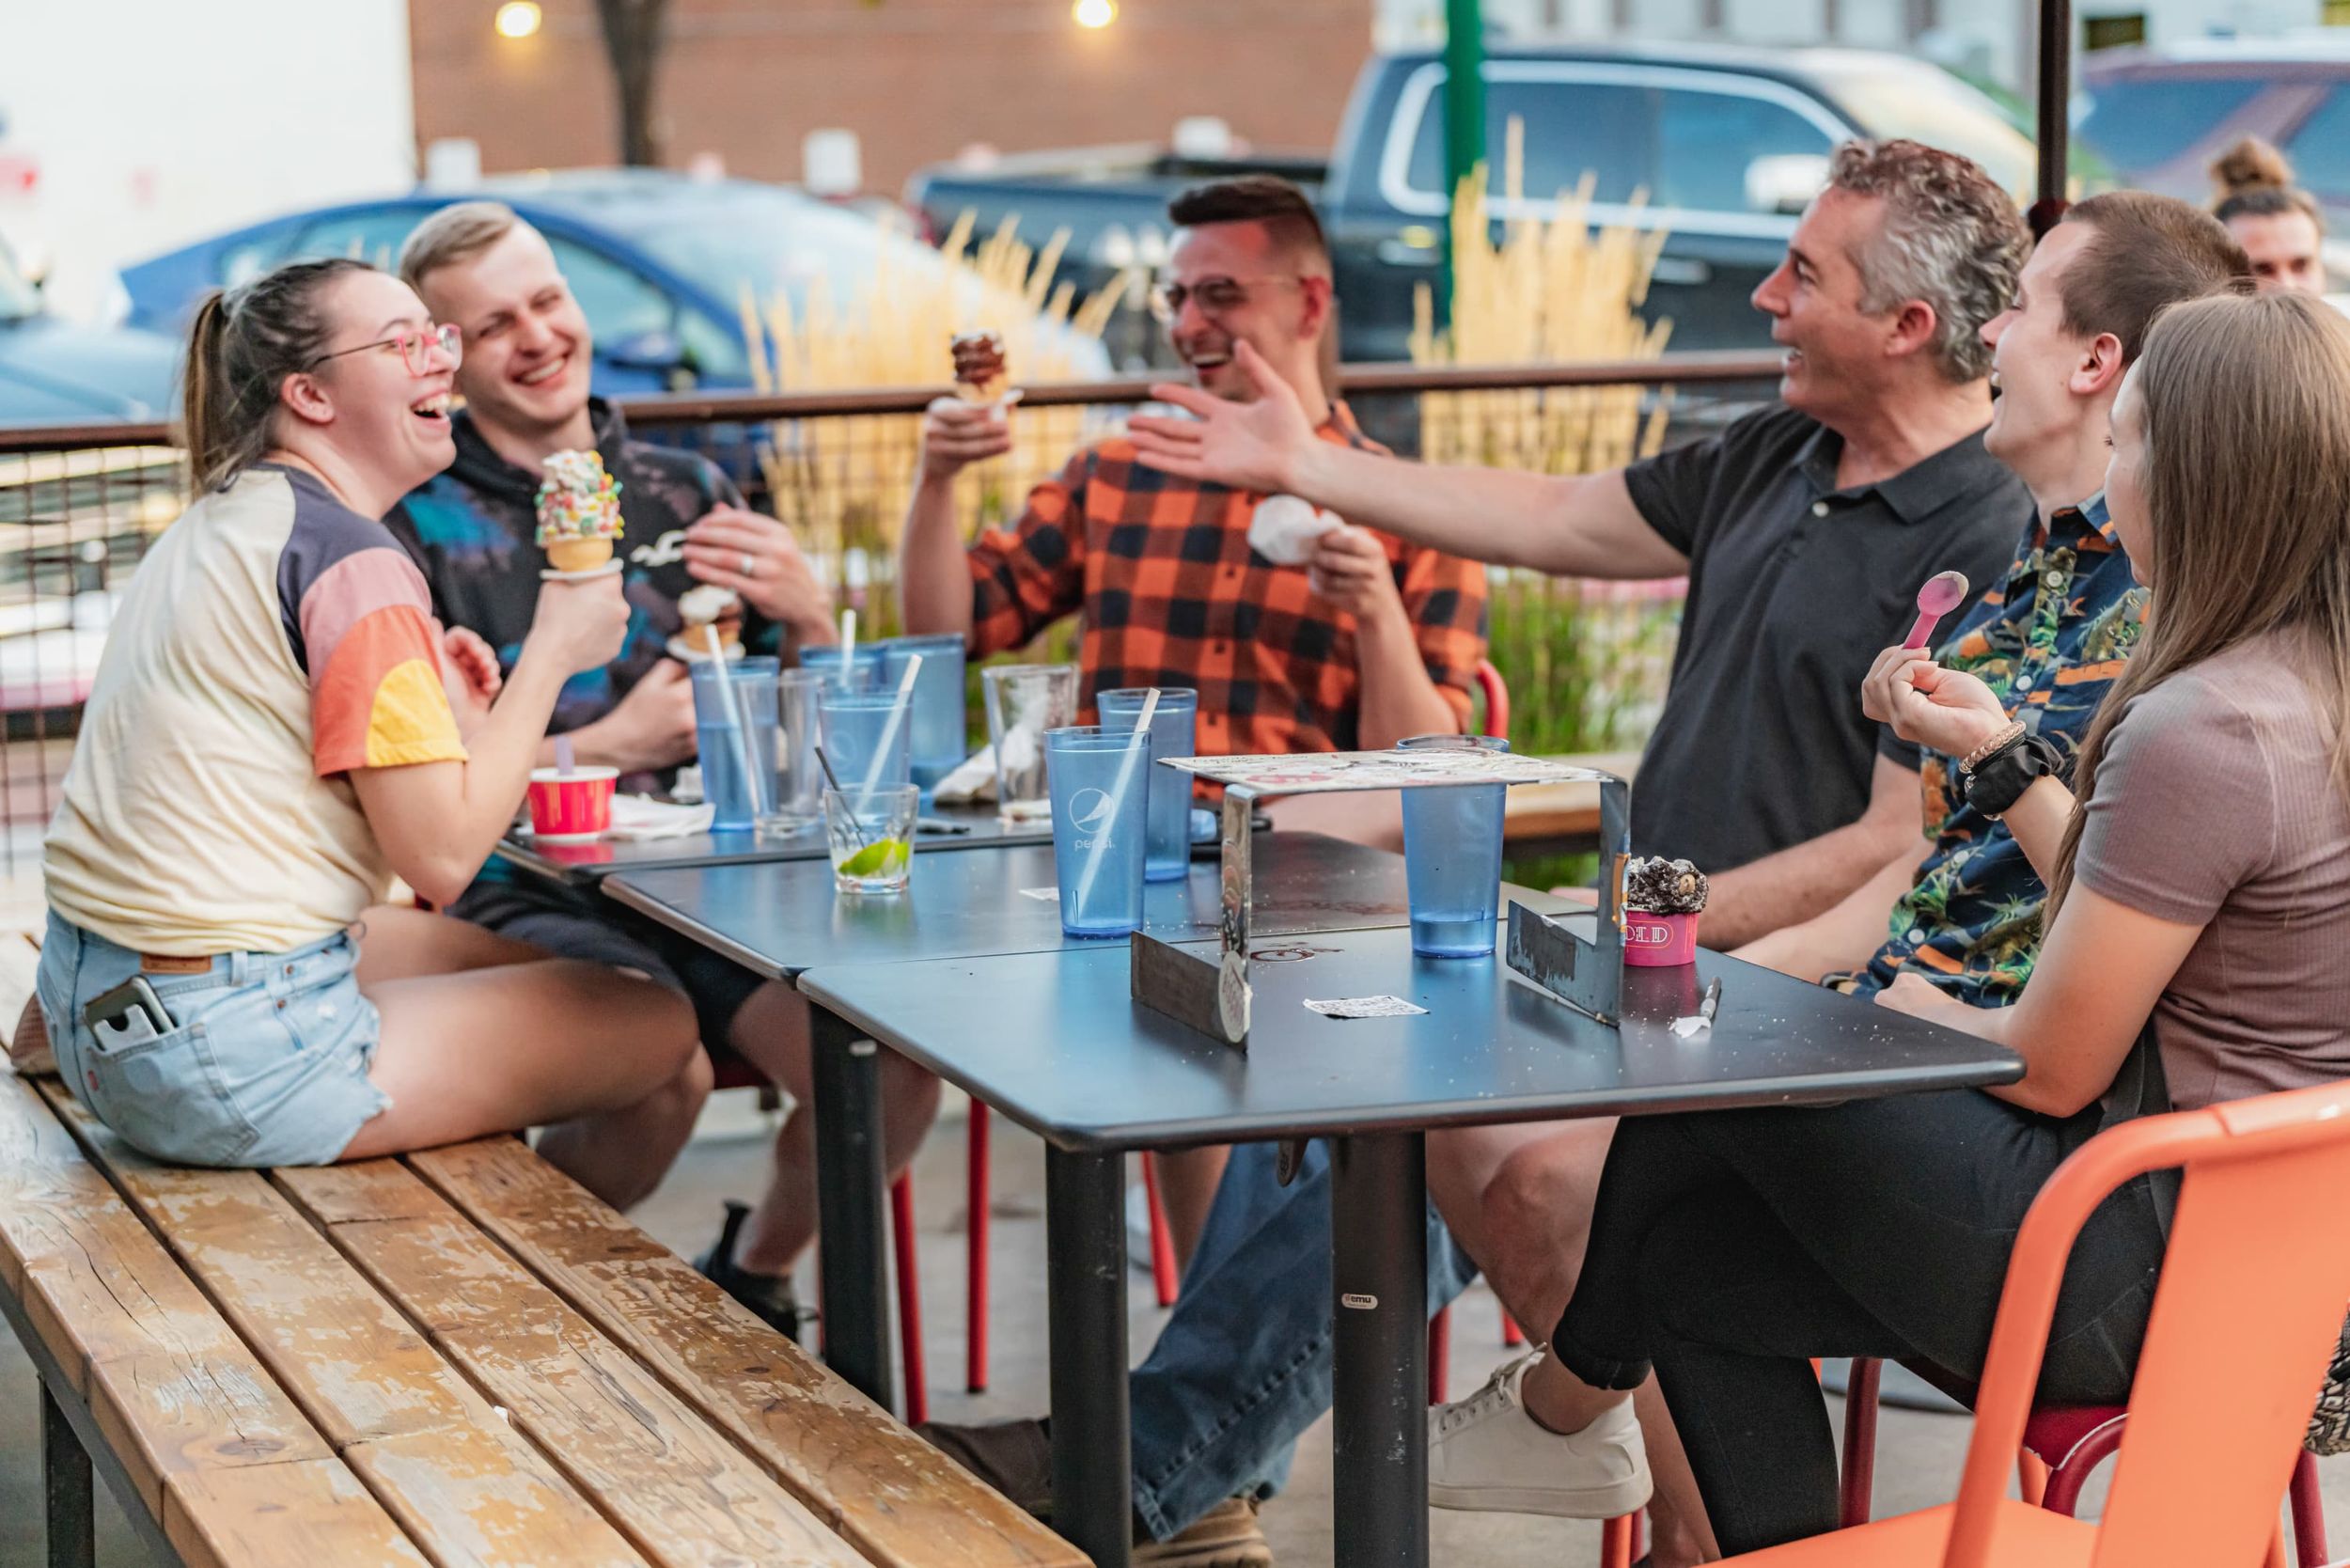 A group of people laugh while eating ice cream at an outdoor table.